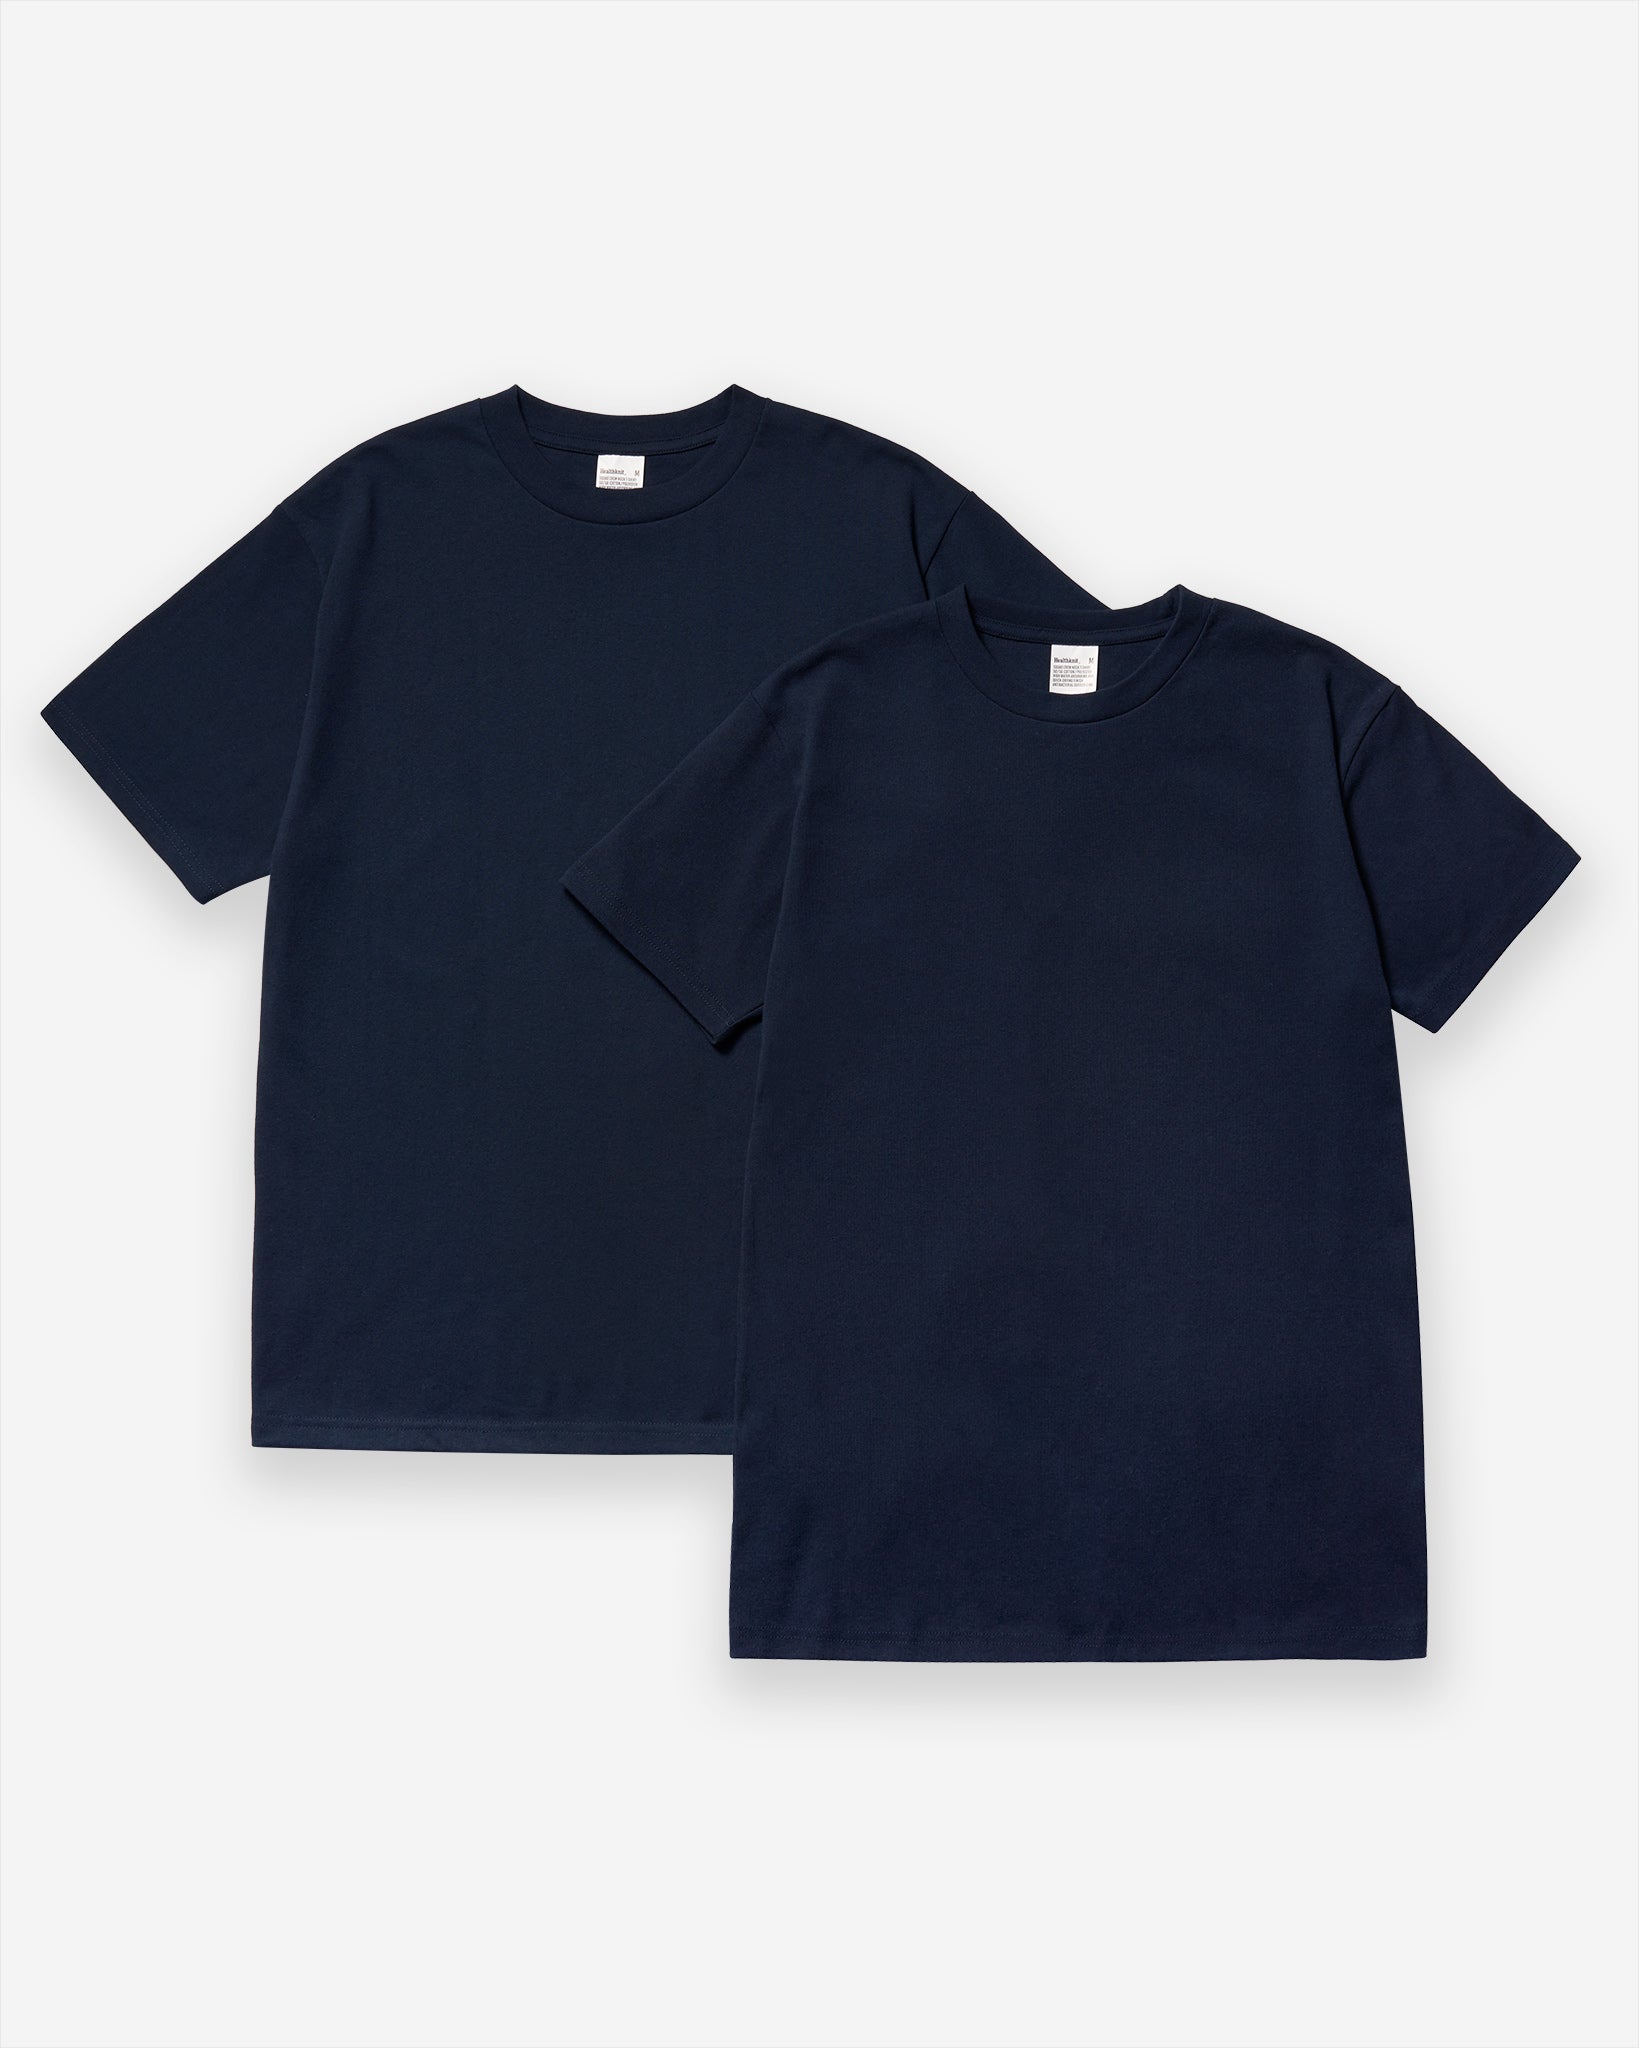 Military S/S Tees (2 Pack) - Navy